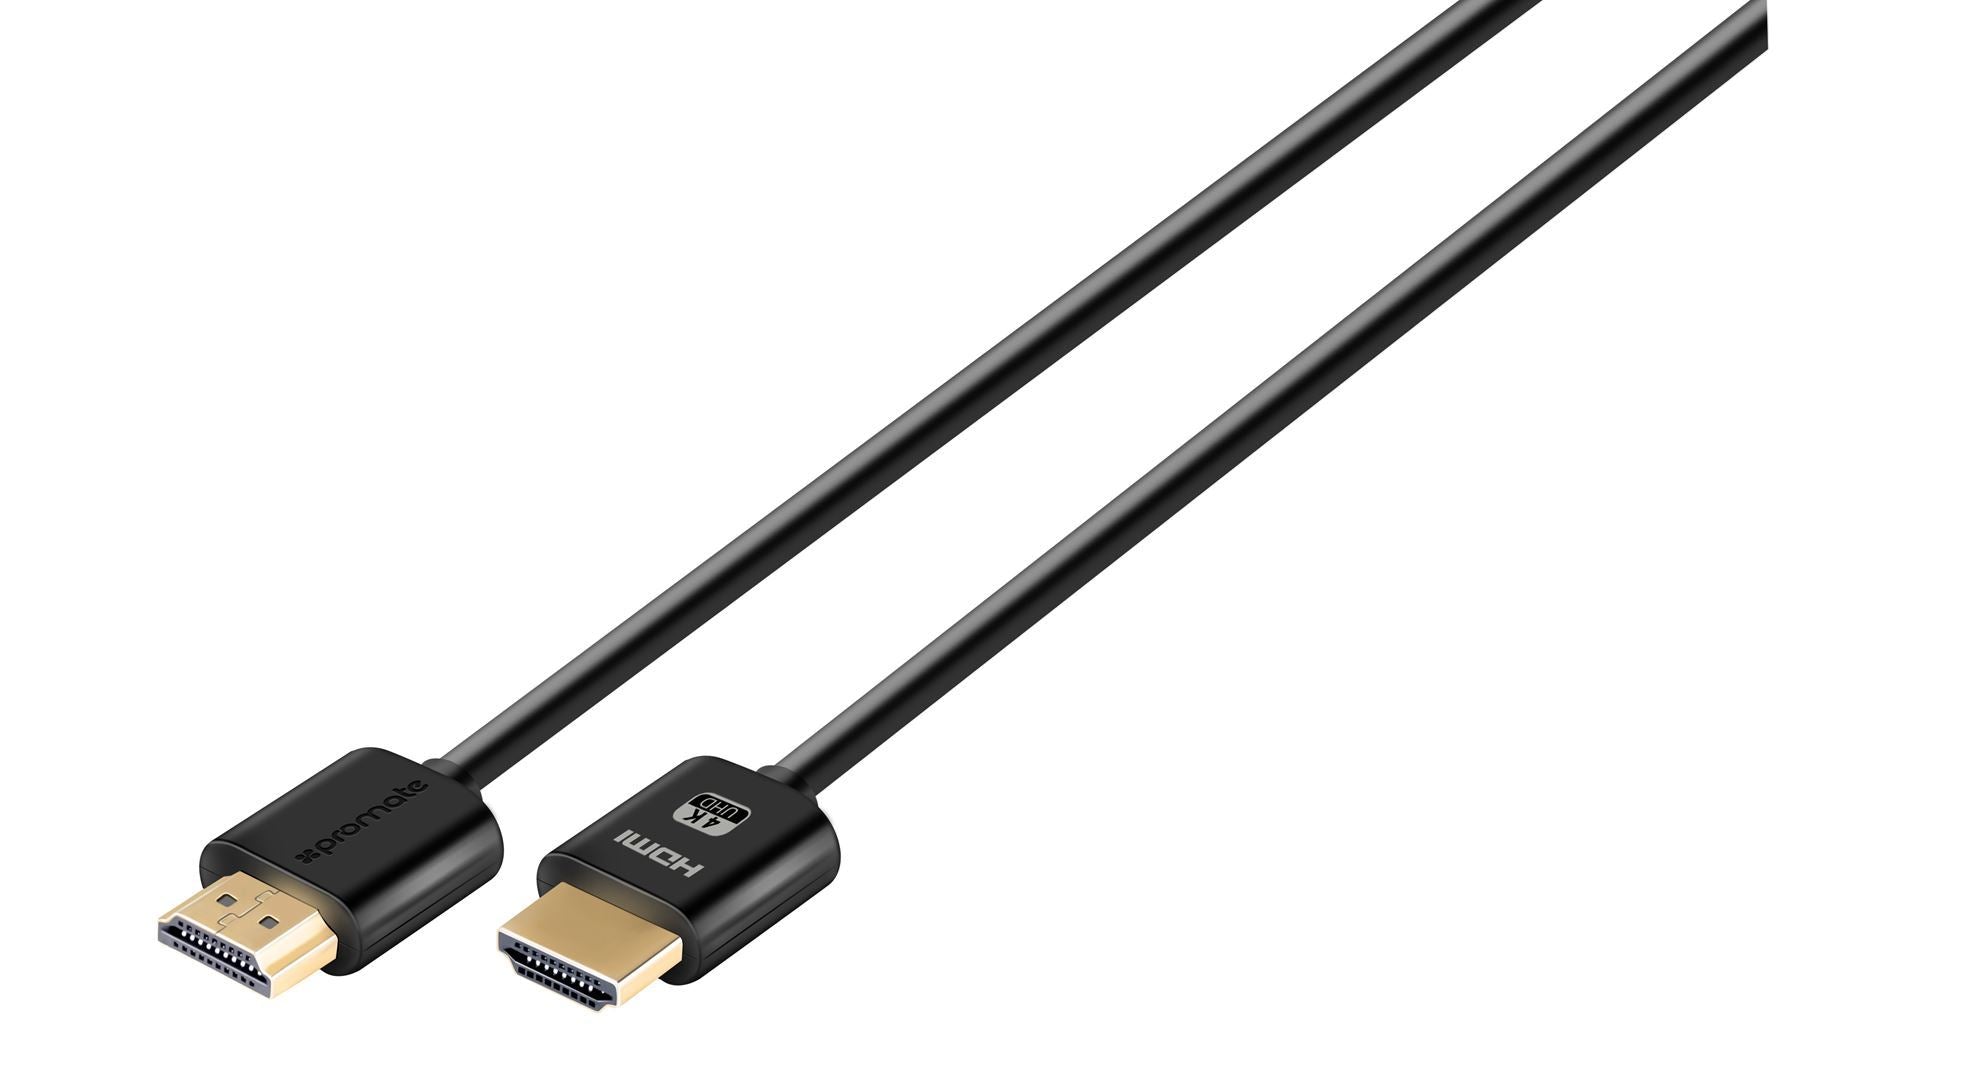 PROMATE_10m_4K_HDMI_cable_with_24K_Gold_plated_connectors._4K_Ultra_HD._High-Speed_Ethernet_Max_Res:_4K@60Hz_(4096X2160)_Colour_Black. 1689